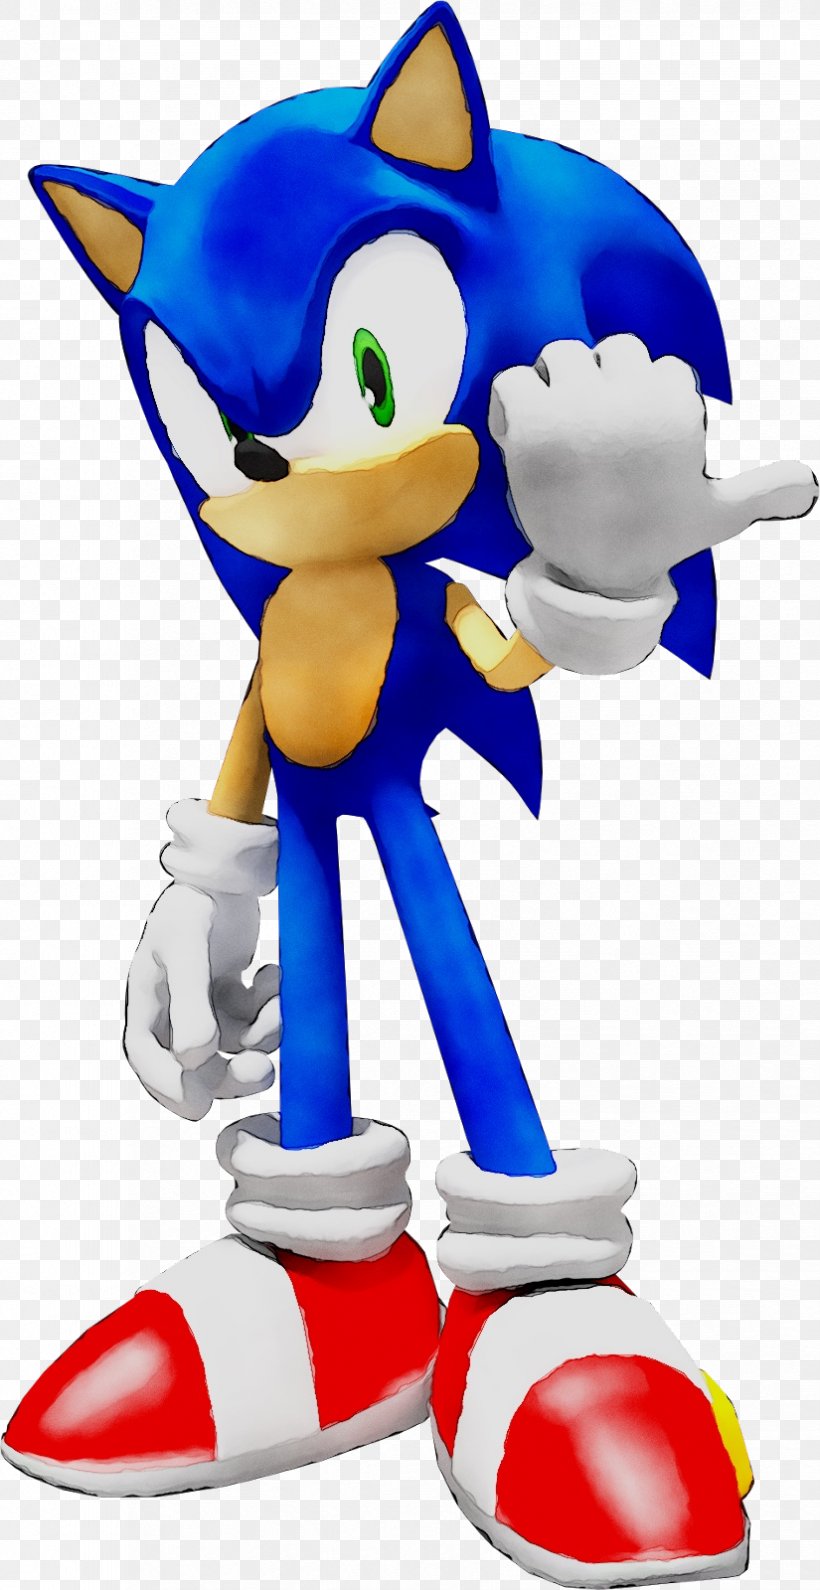 Sonic The Hedgehog 2 Sonic The Hedgehog 4: Episode II Sonic The Hedgehog 3, PNG, 825x1600px, Sonic The Hedgehog 2, Action Figure, Cartoon, Fictional Character, Figurine Download Free